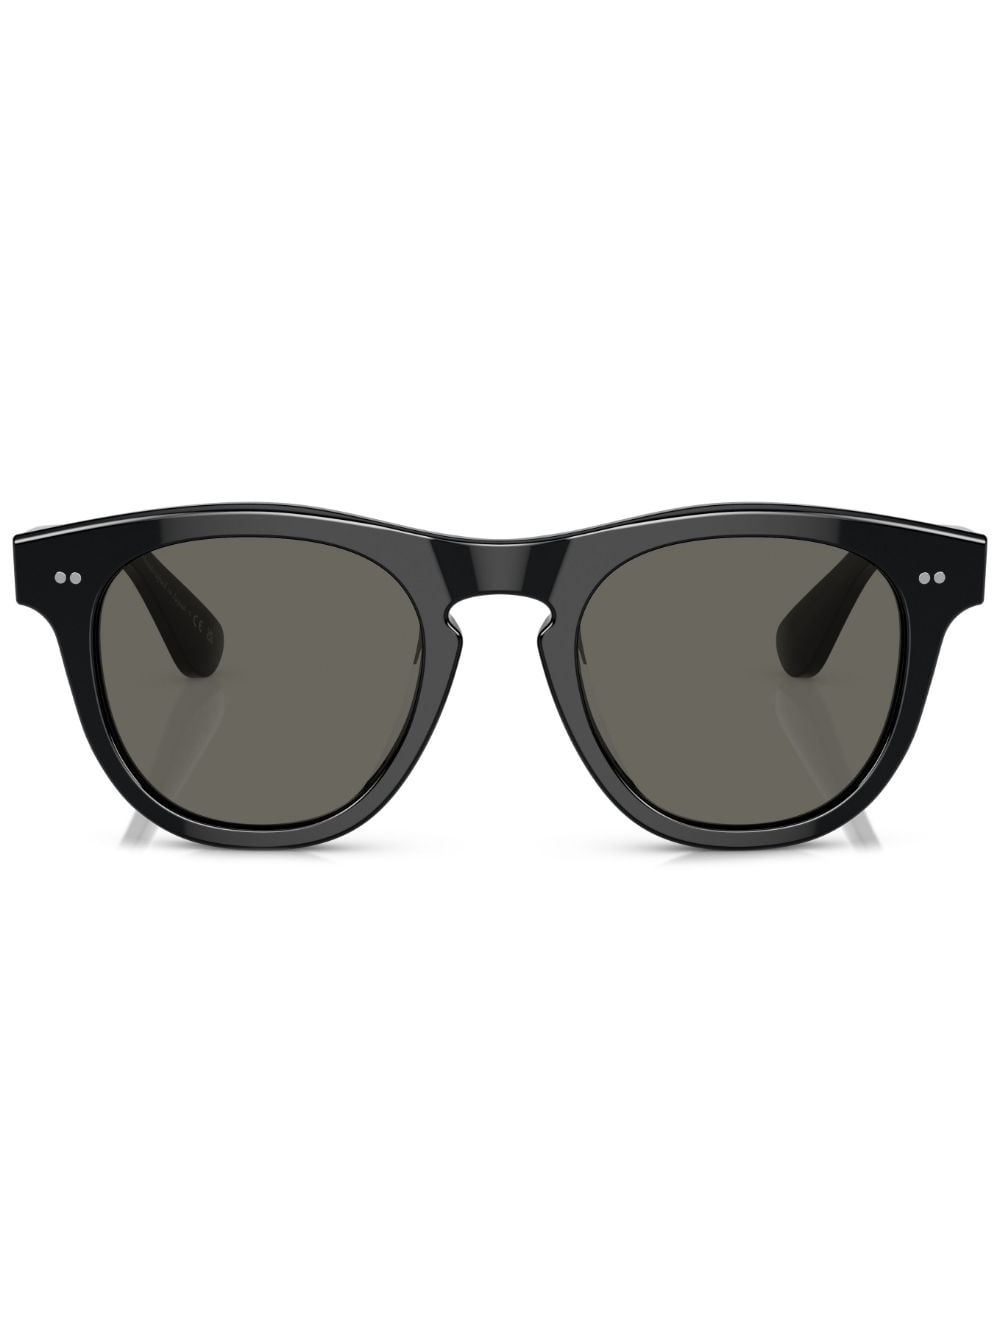 Oliver Peoples Rorke Square-shape Sunglasses In 1731r5 Black